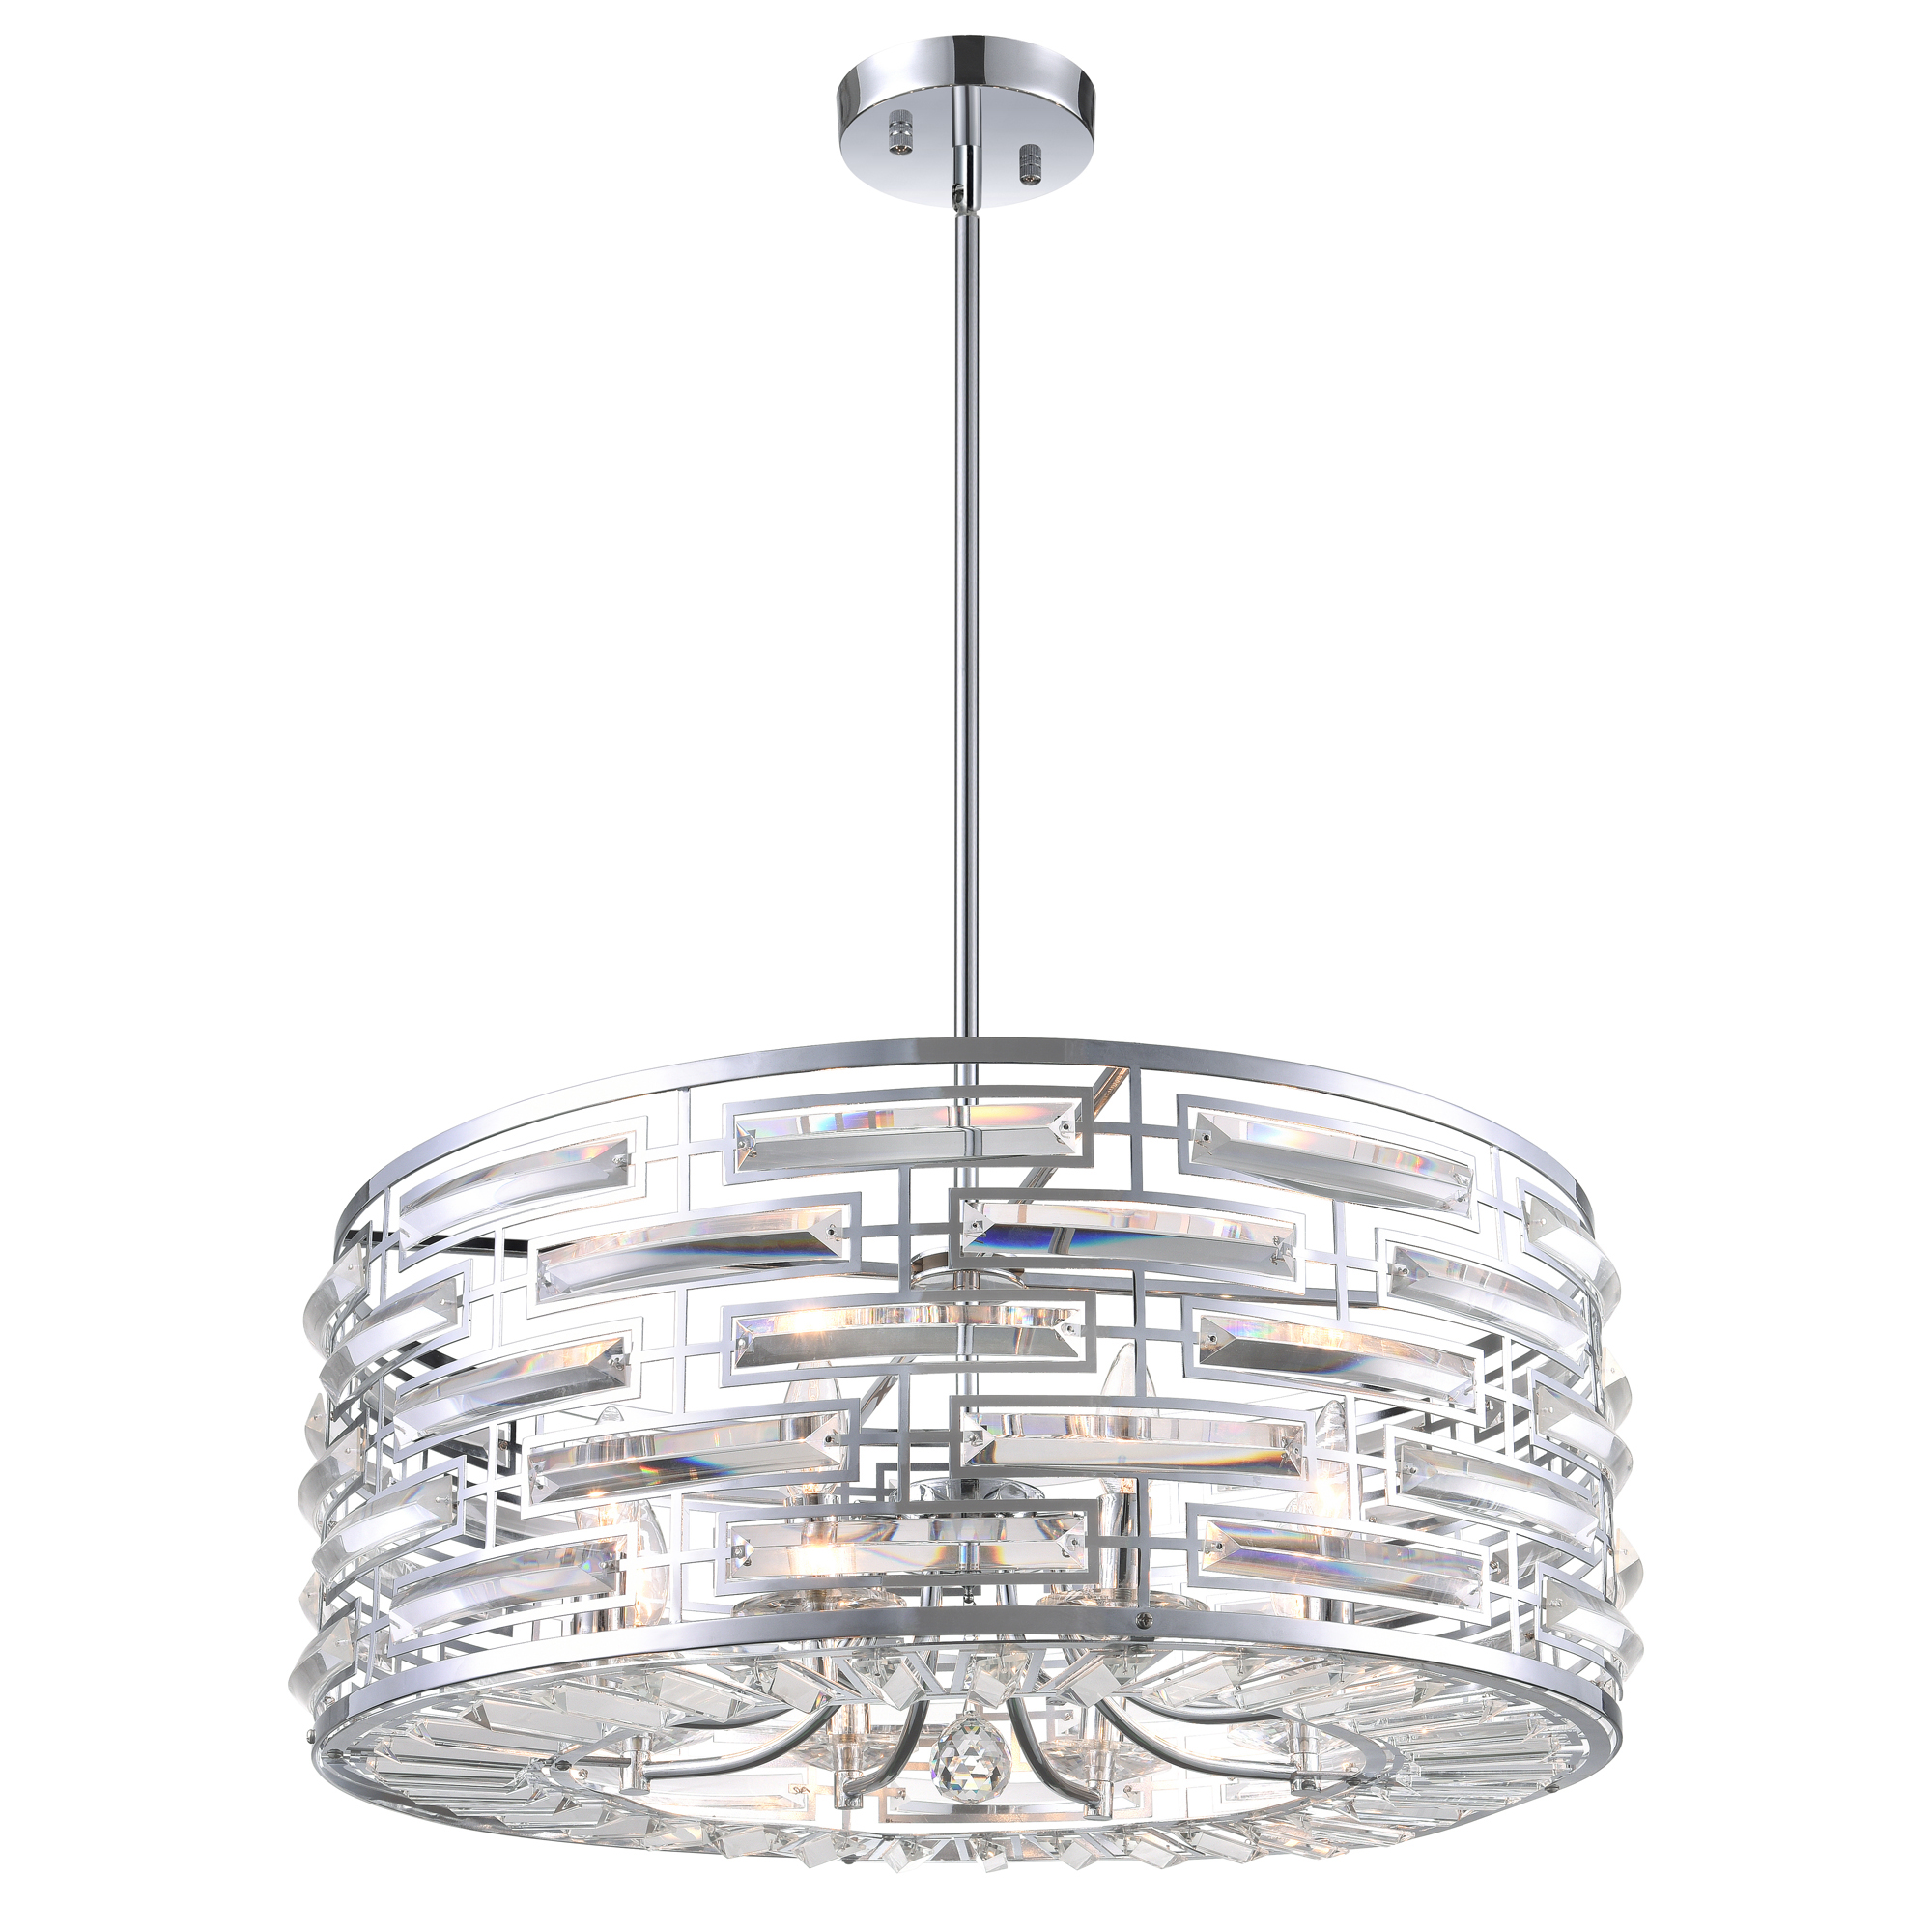 Petia 8 Light Drum Shade Chandelier With Chrome Finish